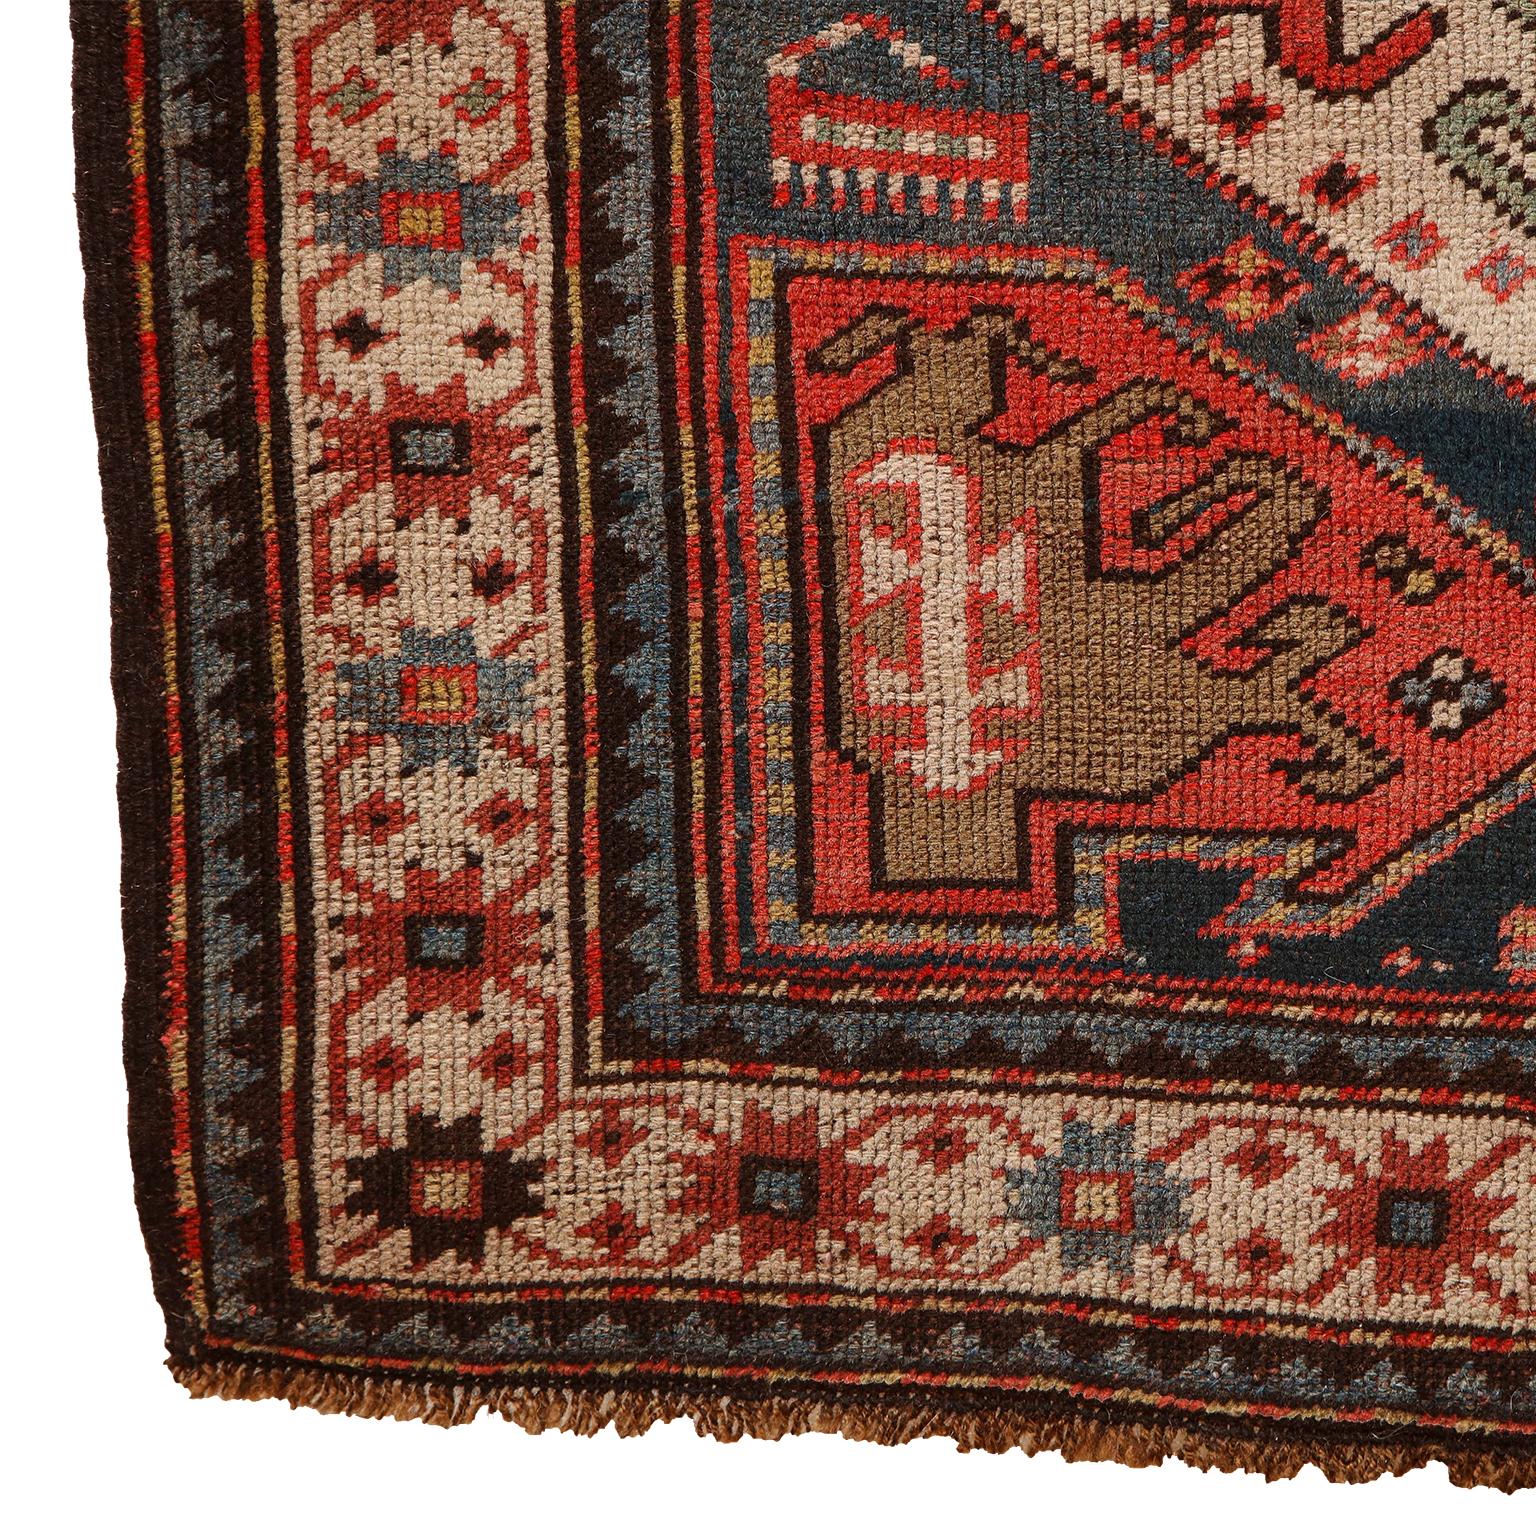 Antique 1880s Caucasian Rug, Hand-knotted Wool, Blue, Green, Red, 4' x 6' For Sale 6